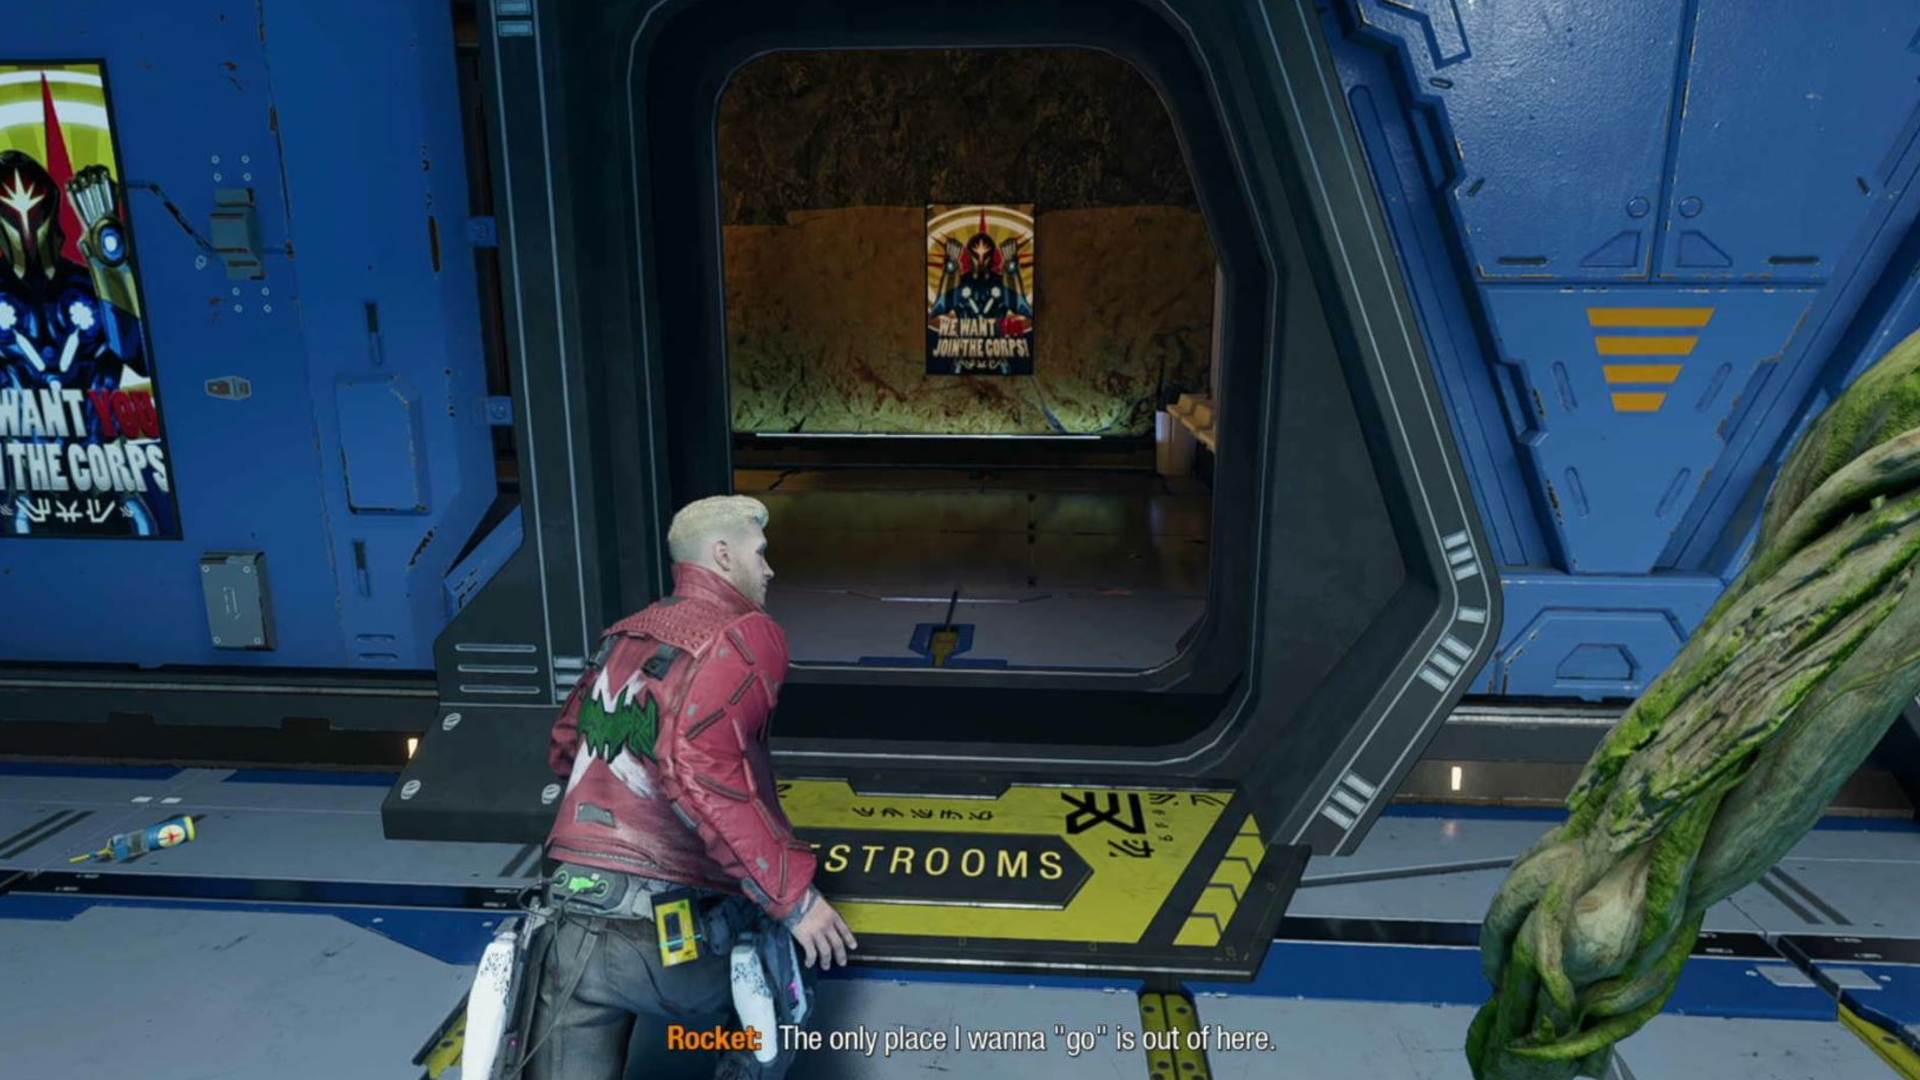 Guardians of the Galaxy outfit locations: Star-Lord can be seen walking into the restrooms.